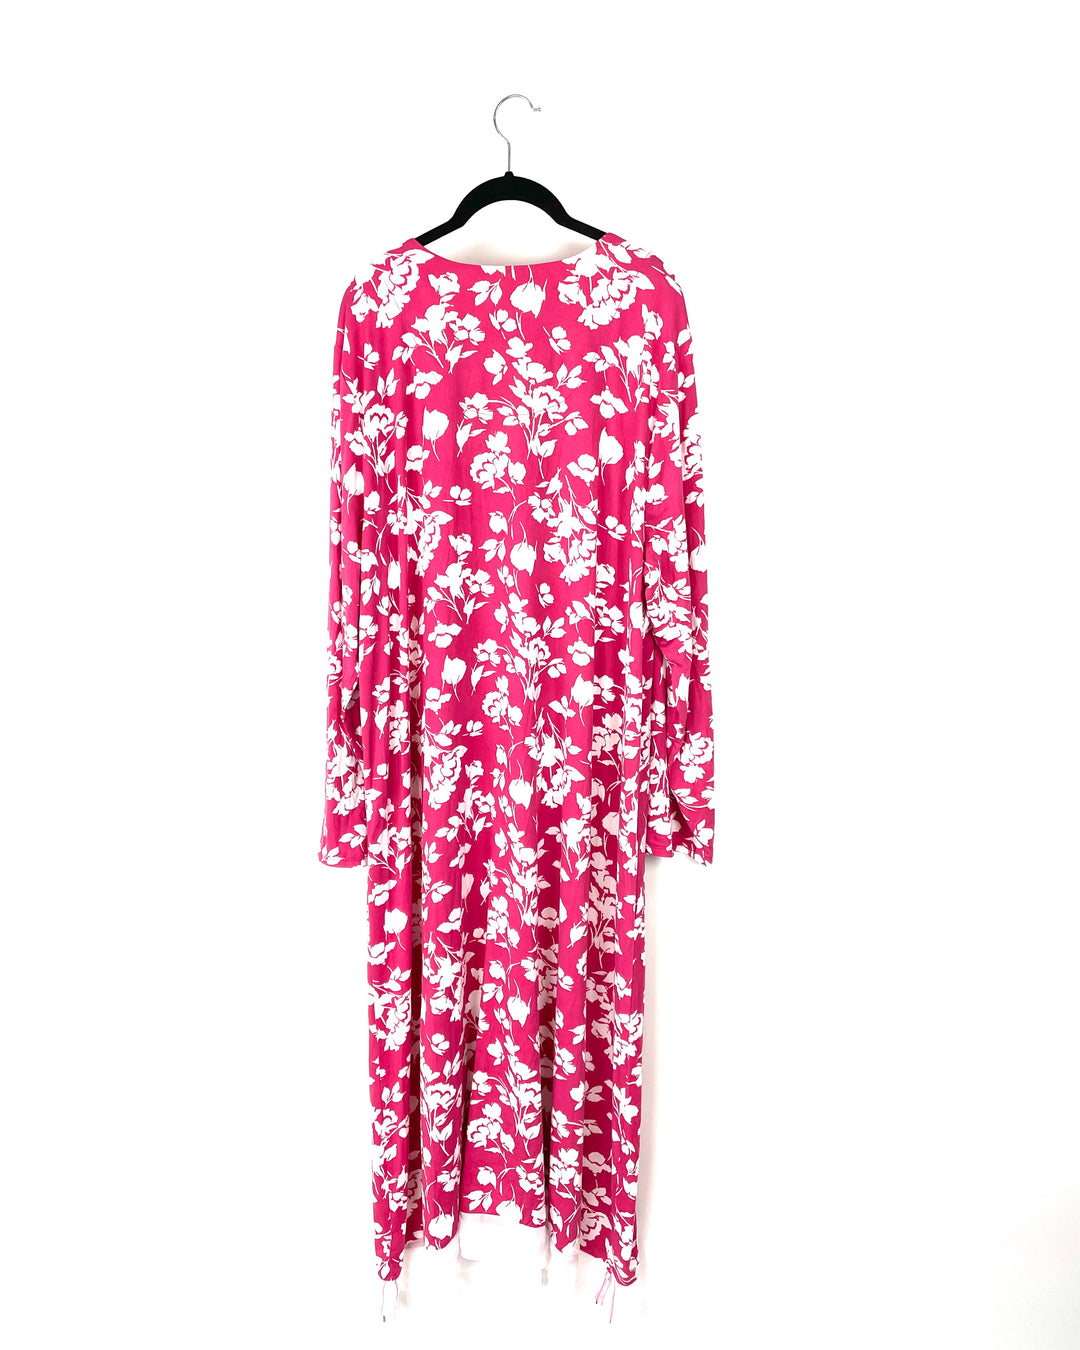 Long Sleeve Bright Pink Floral Nightgown - 1X